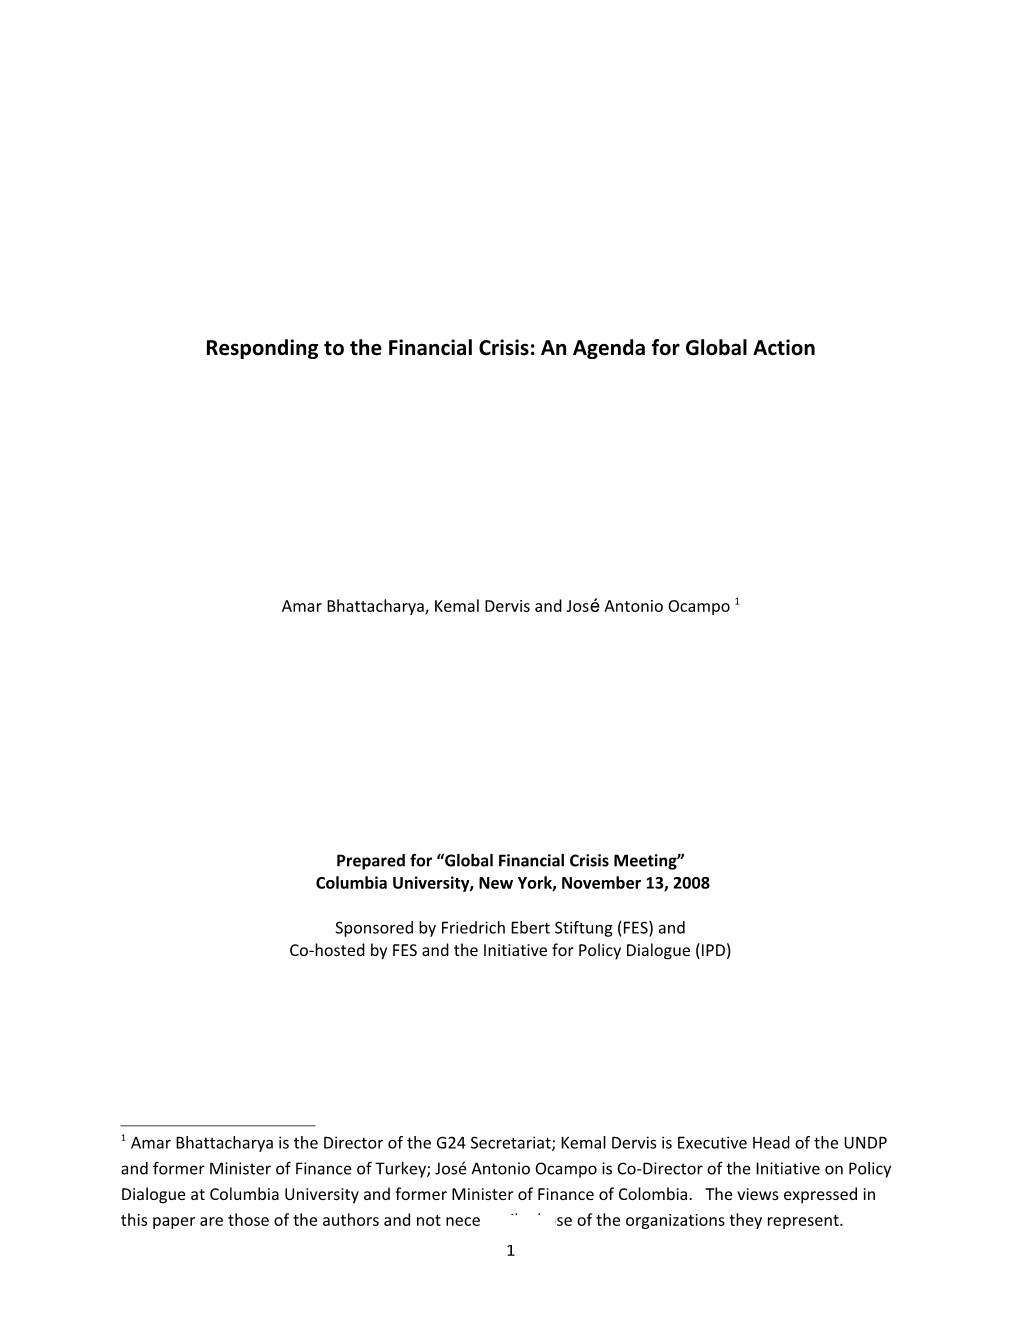 Responding to the Financial Crisis: a Global Agenda of Action